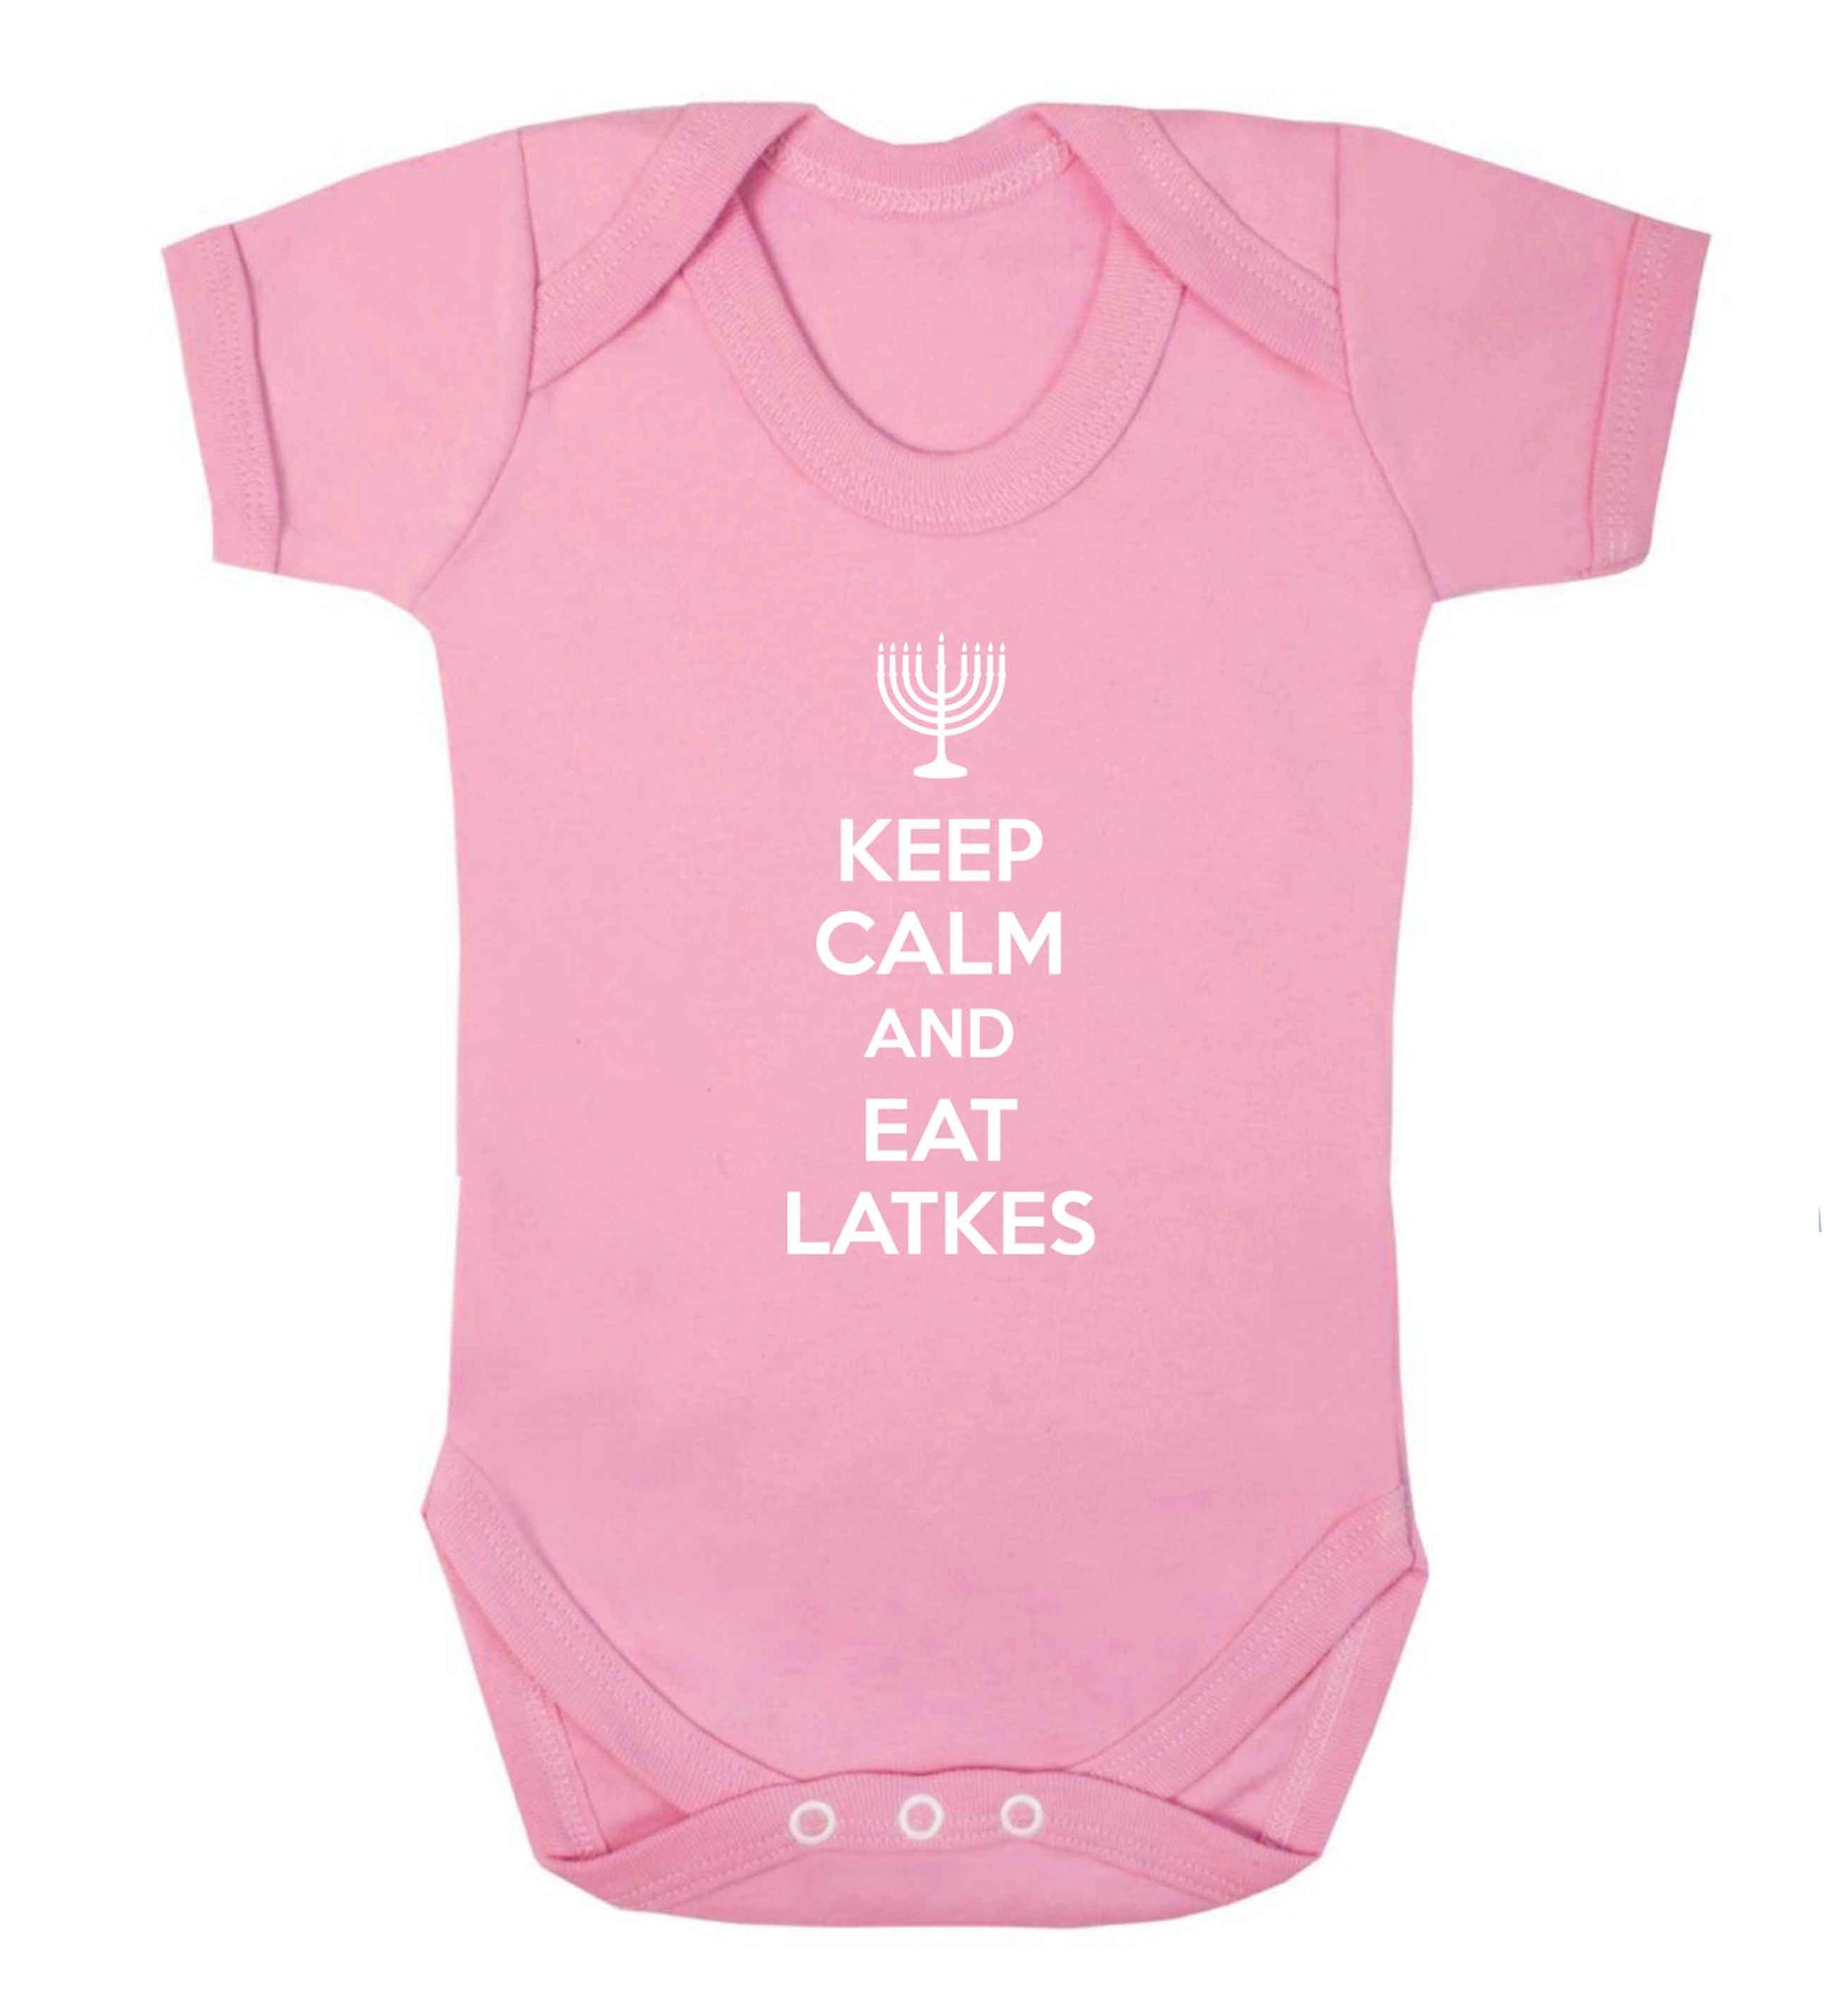 Keep calm and eat latkes baby vest pale pink 18-24 months